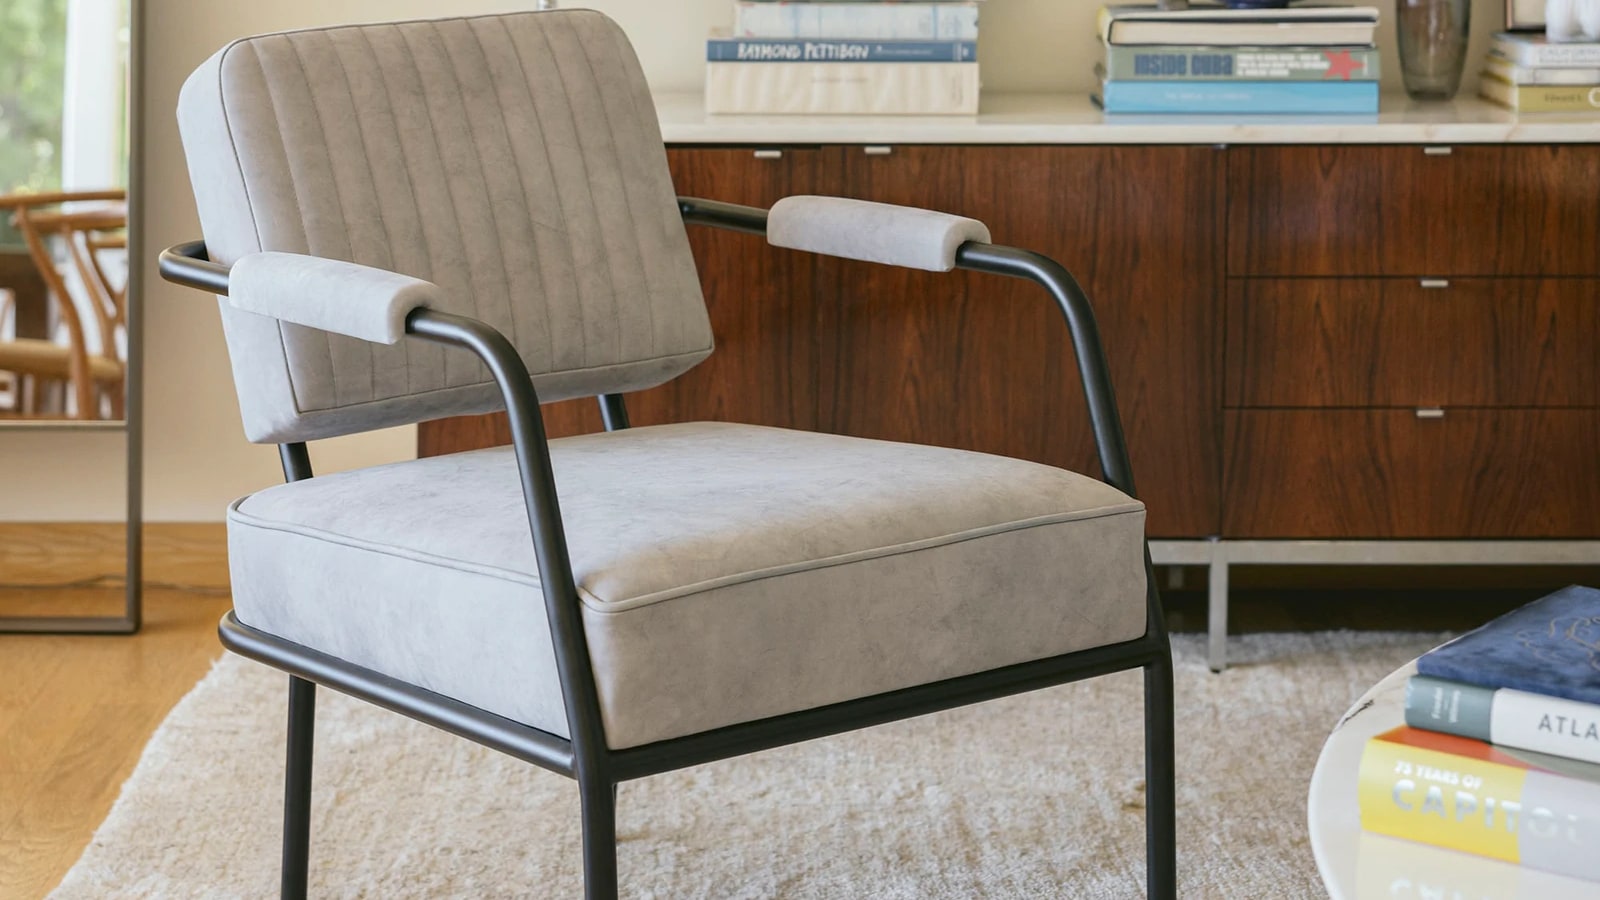 ICON Bronco Handmade Chair is inspired by the original Bronco back bench seat from 1966